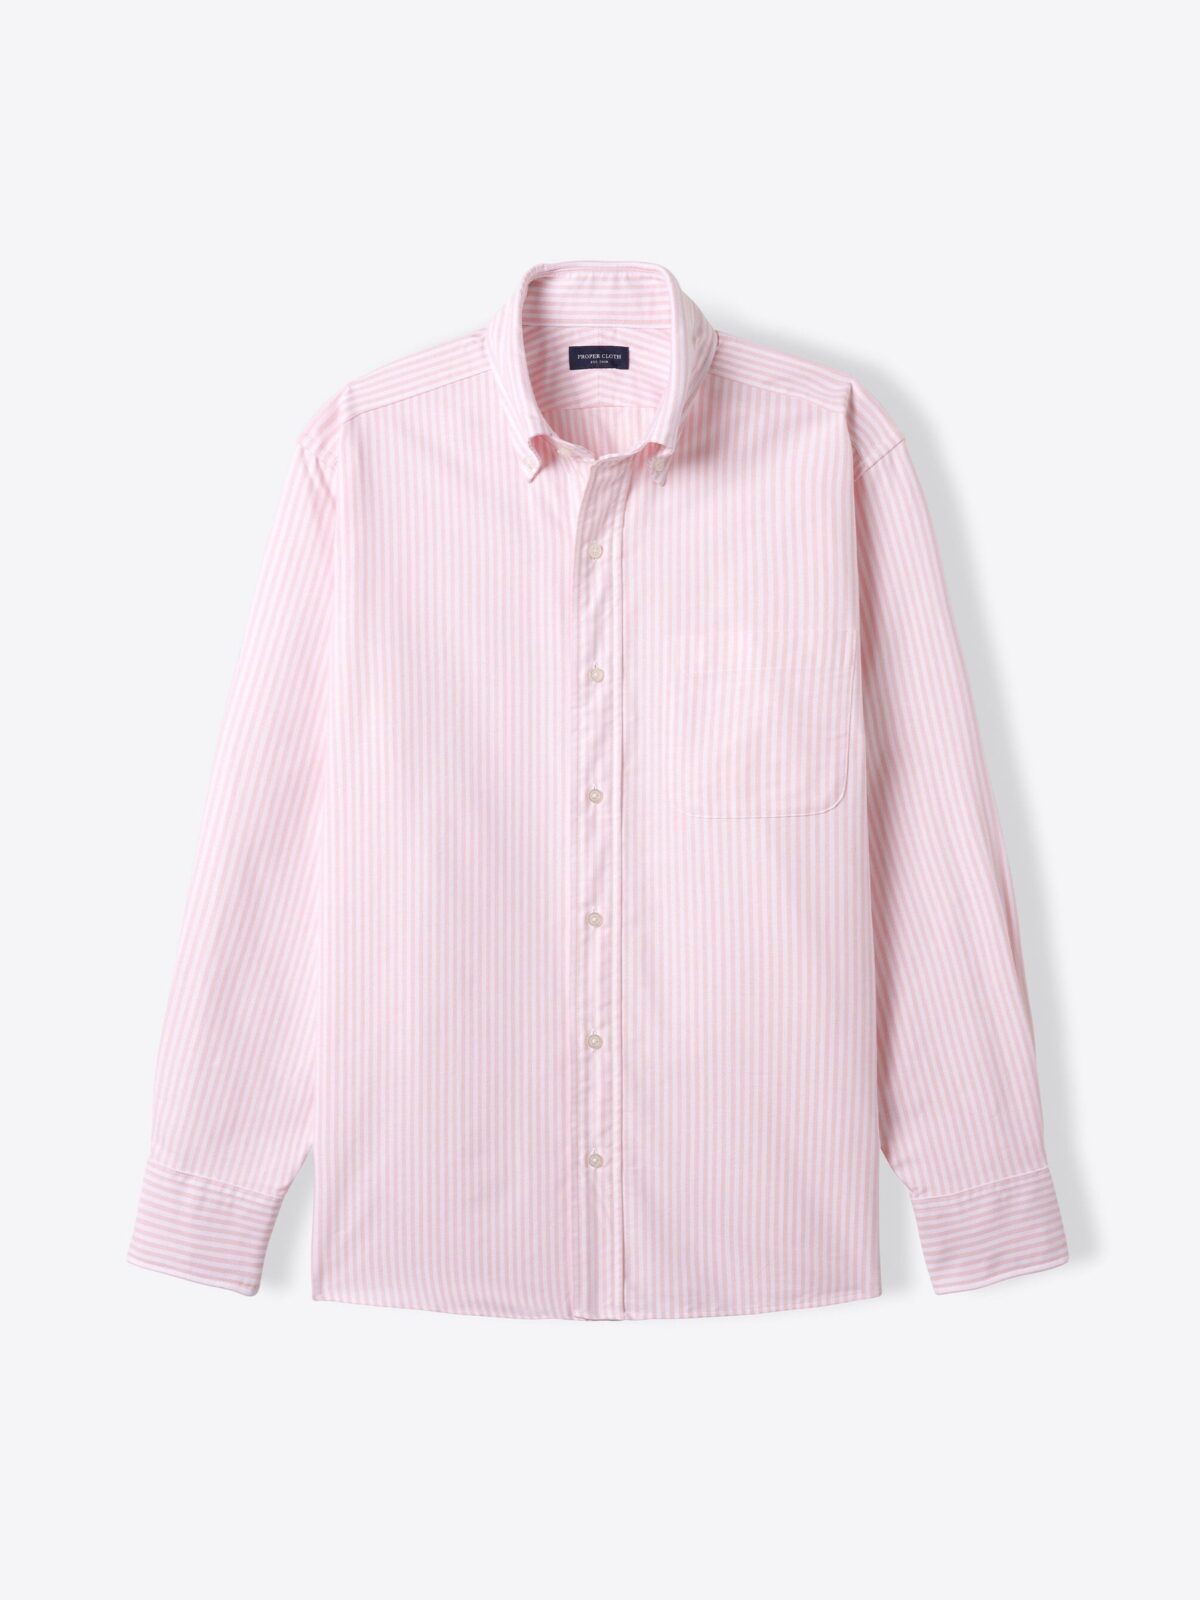 Pink University Stripe Oxford Cloth Fitted Dress Shirt Shirt by Proper ...